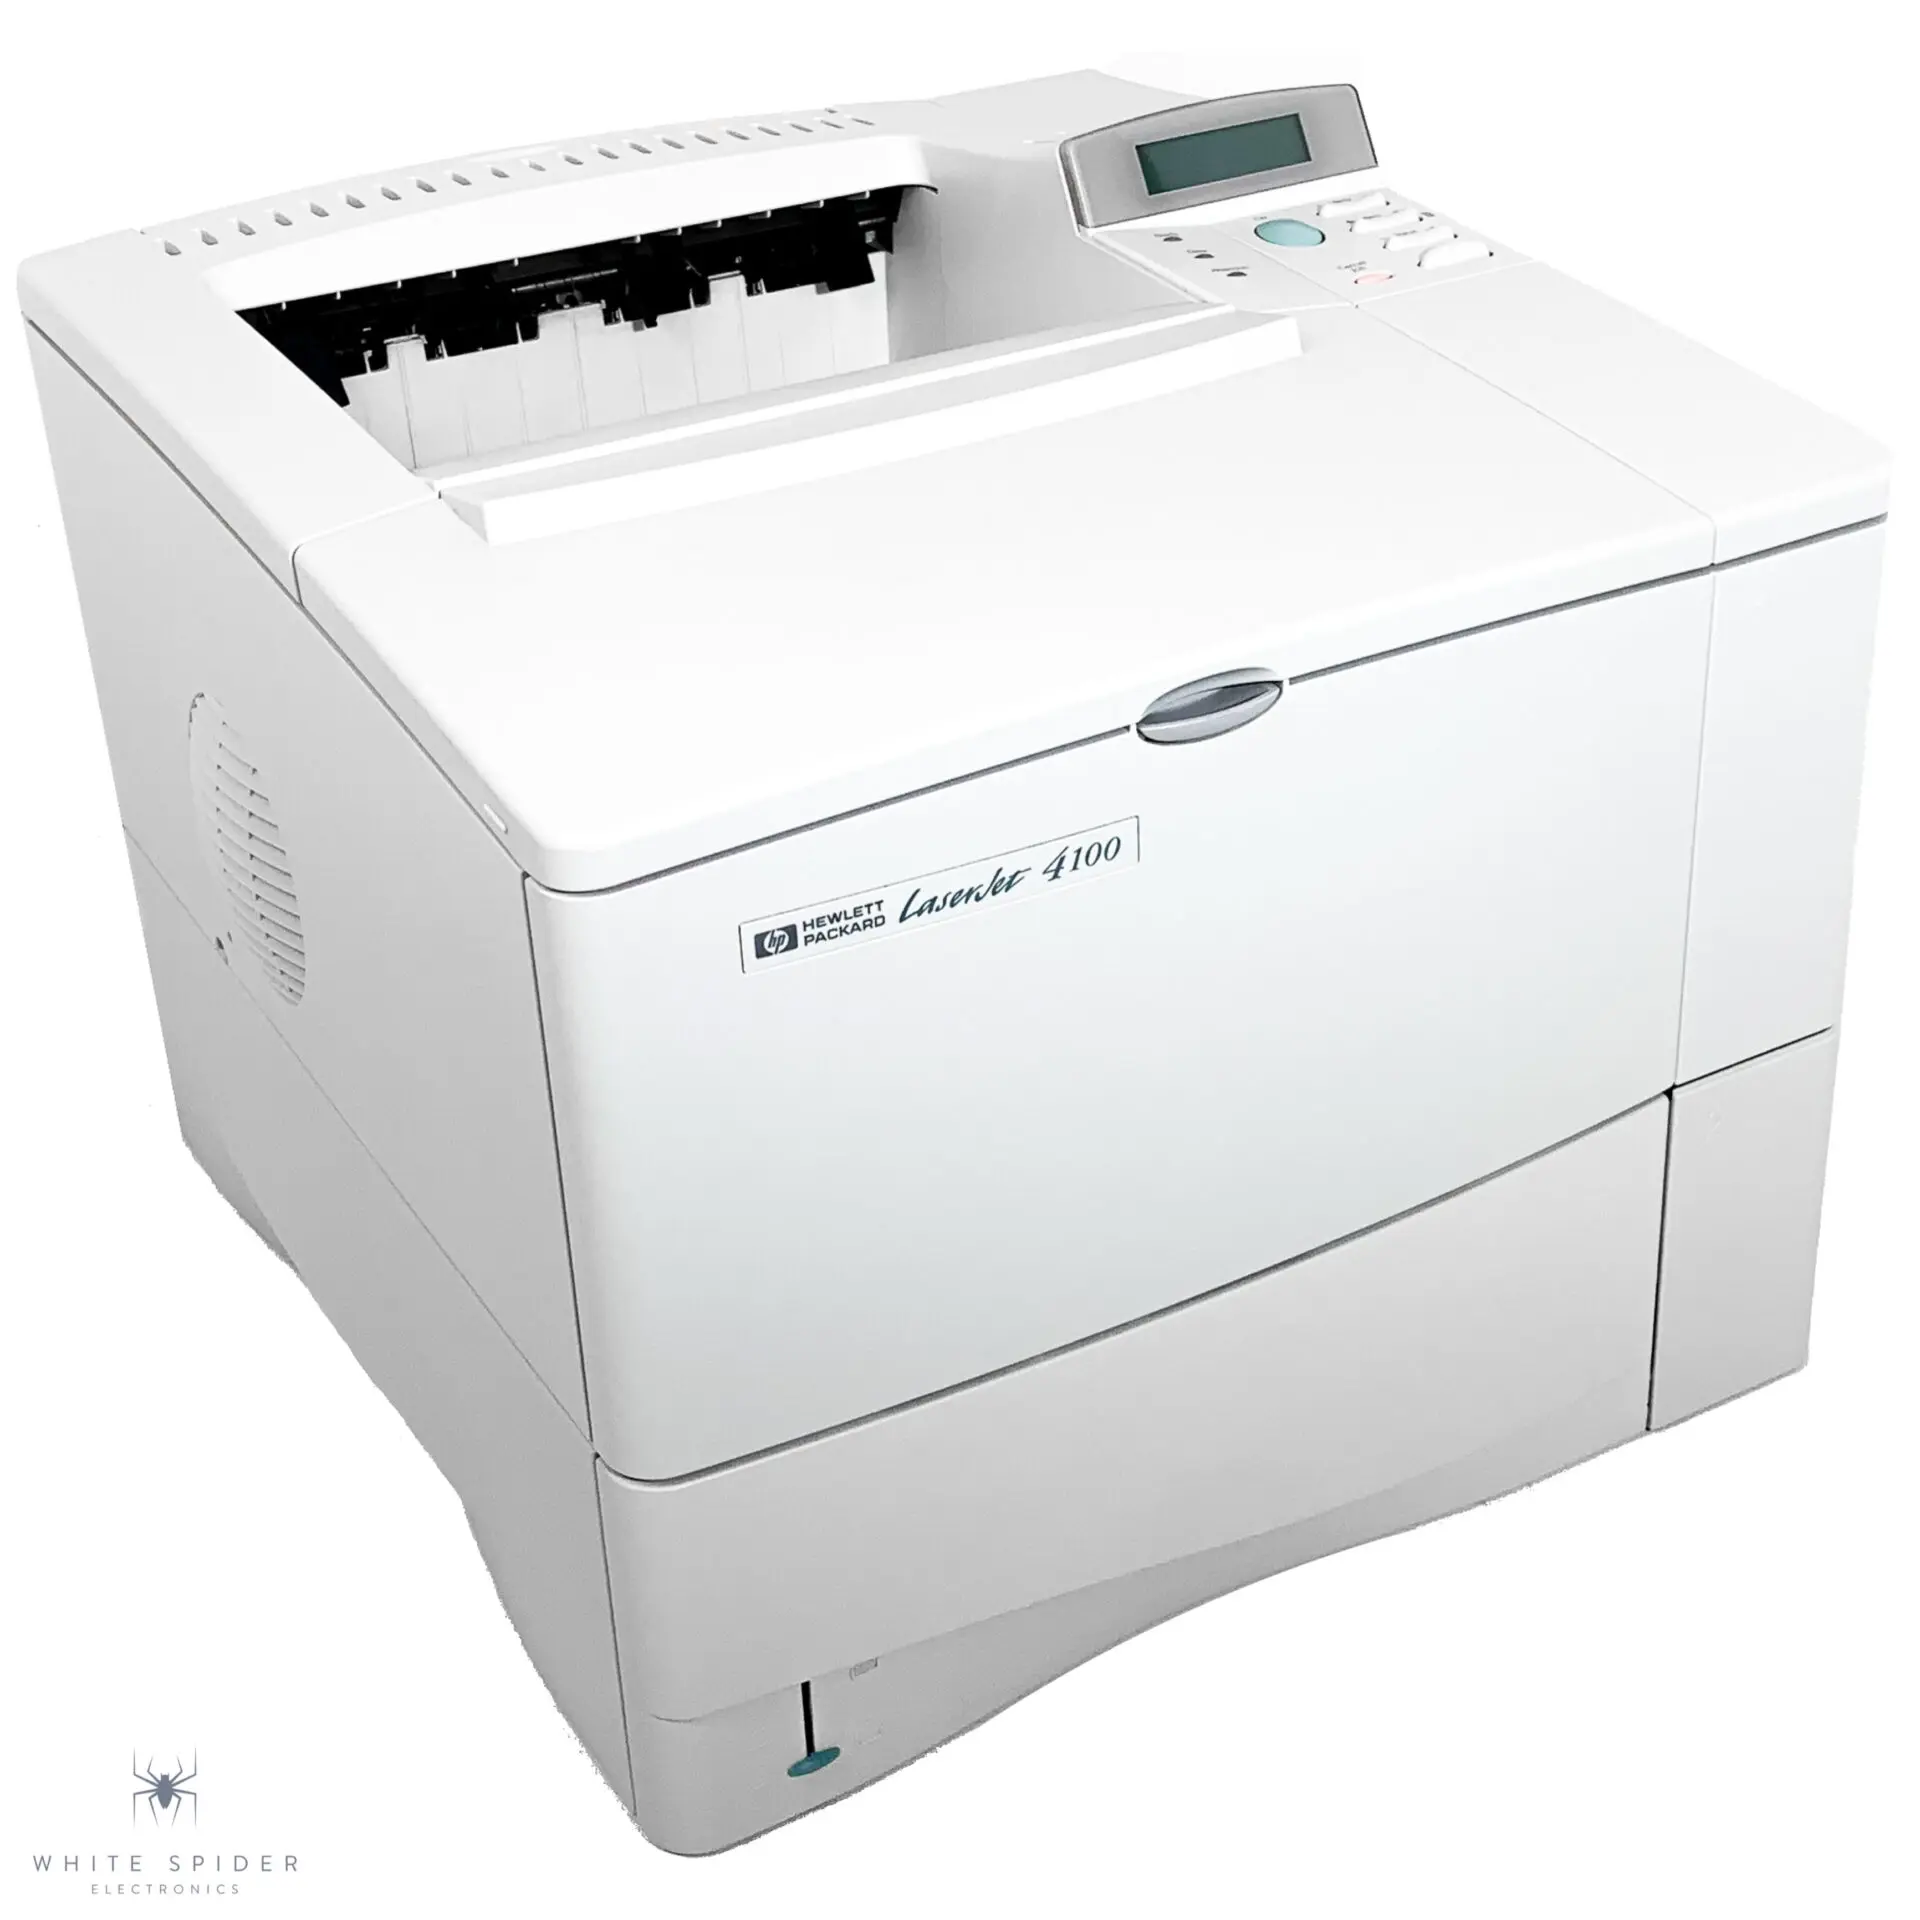 Hp 4100 printer: reliable & efficient printing solution